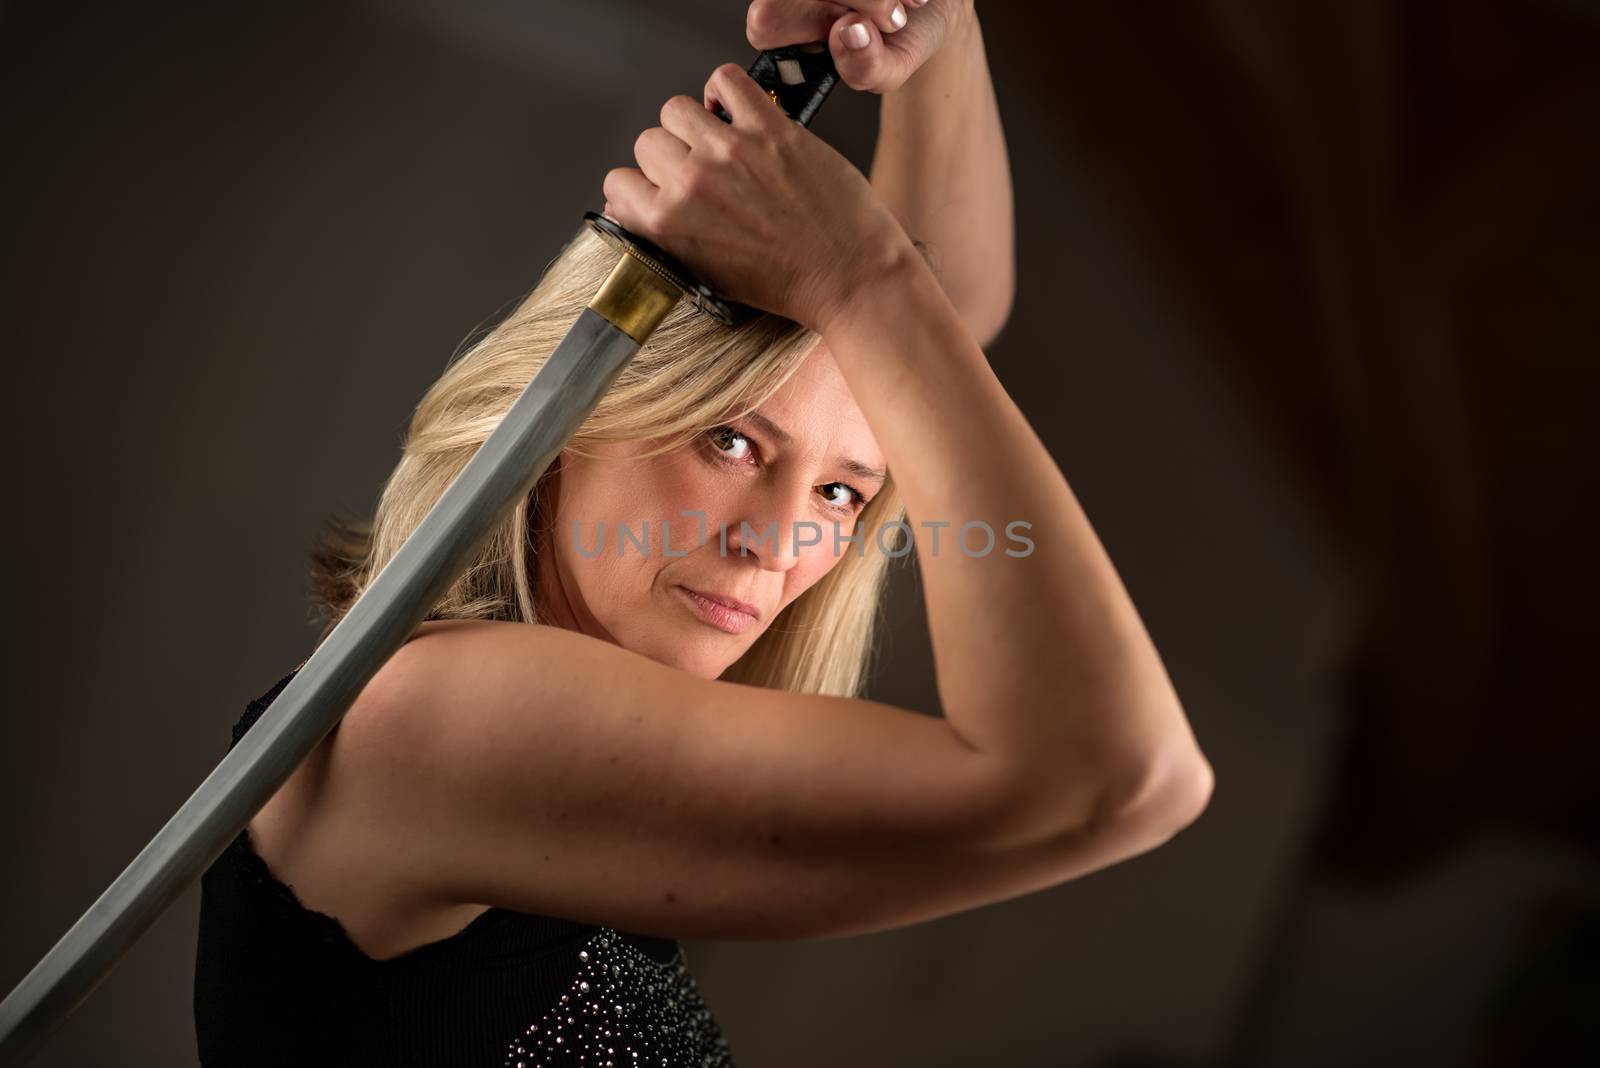 Strong female fighter with samurai sword in action